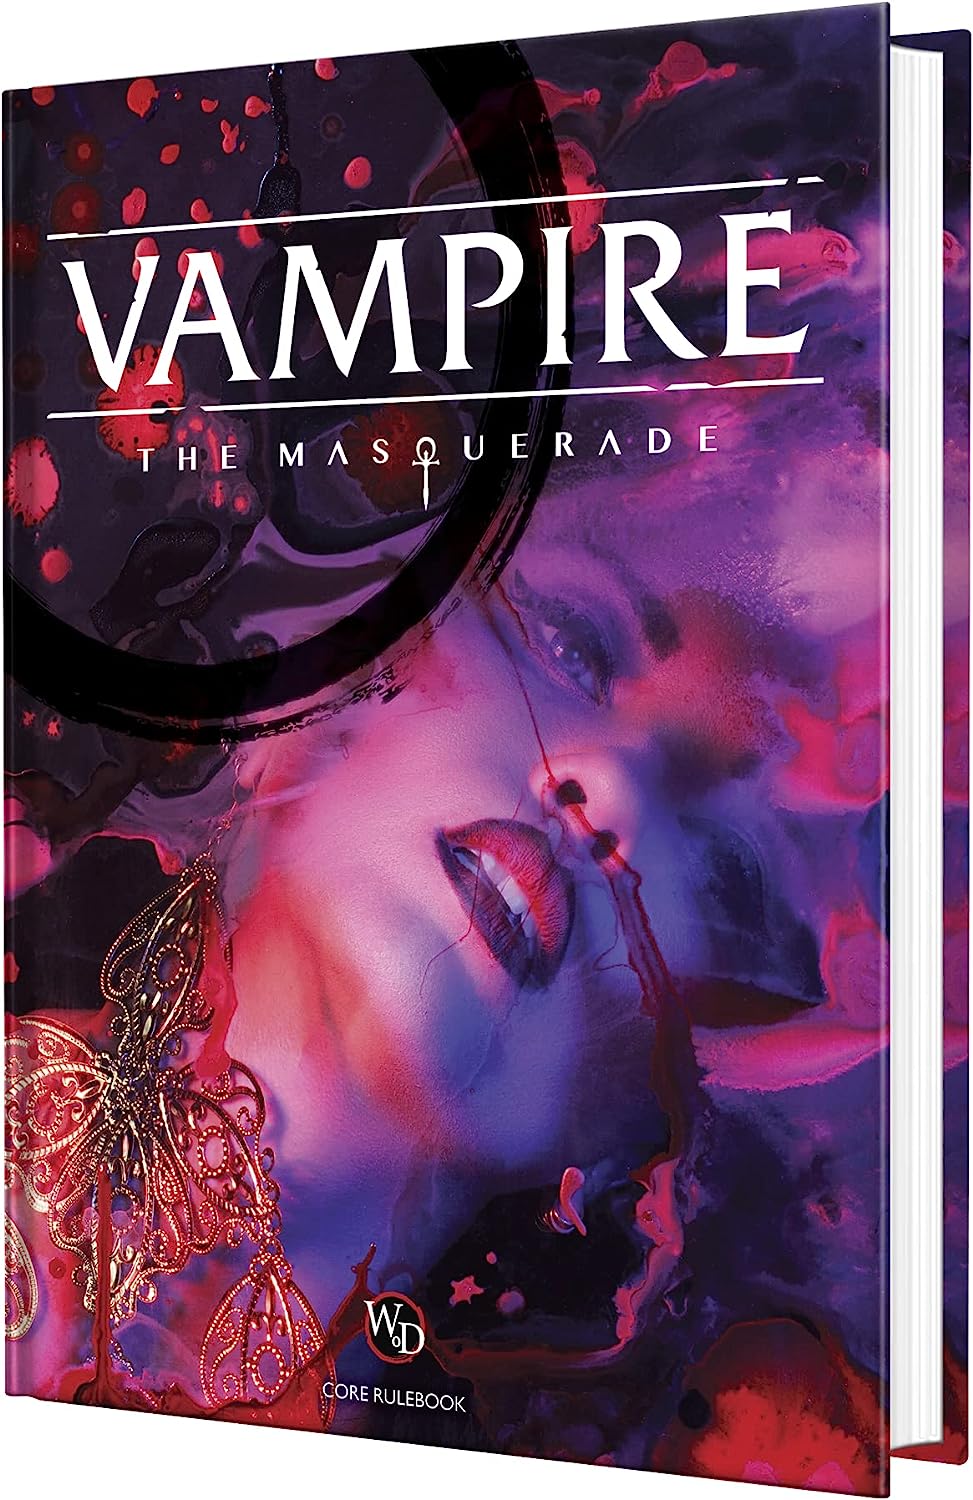 Vampire: The Masquerade 5th Edition Roleplaying Game Core Rulebook | CCGPrime